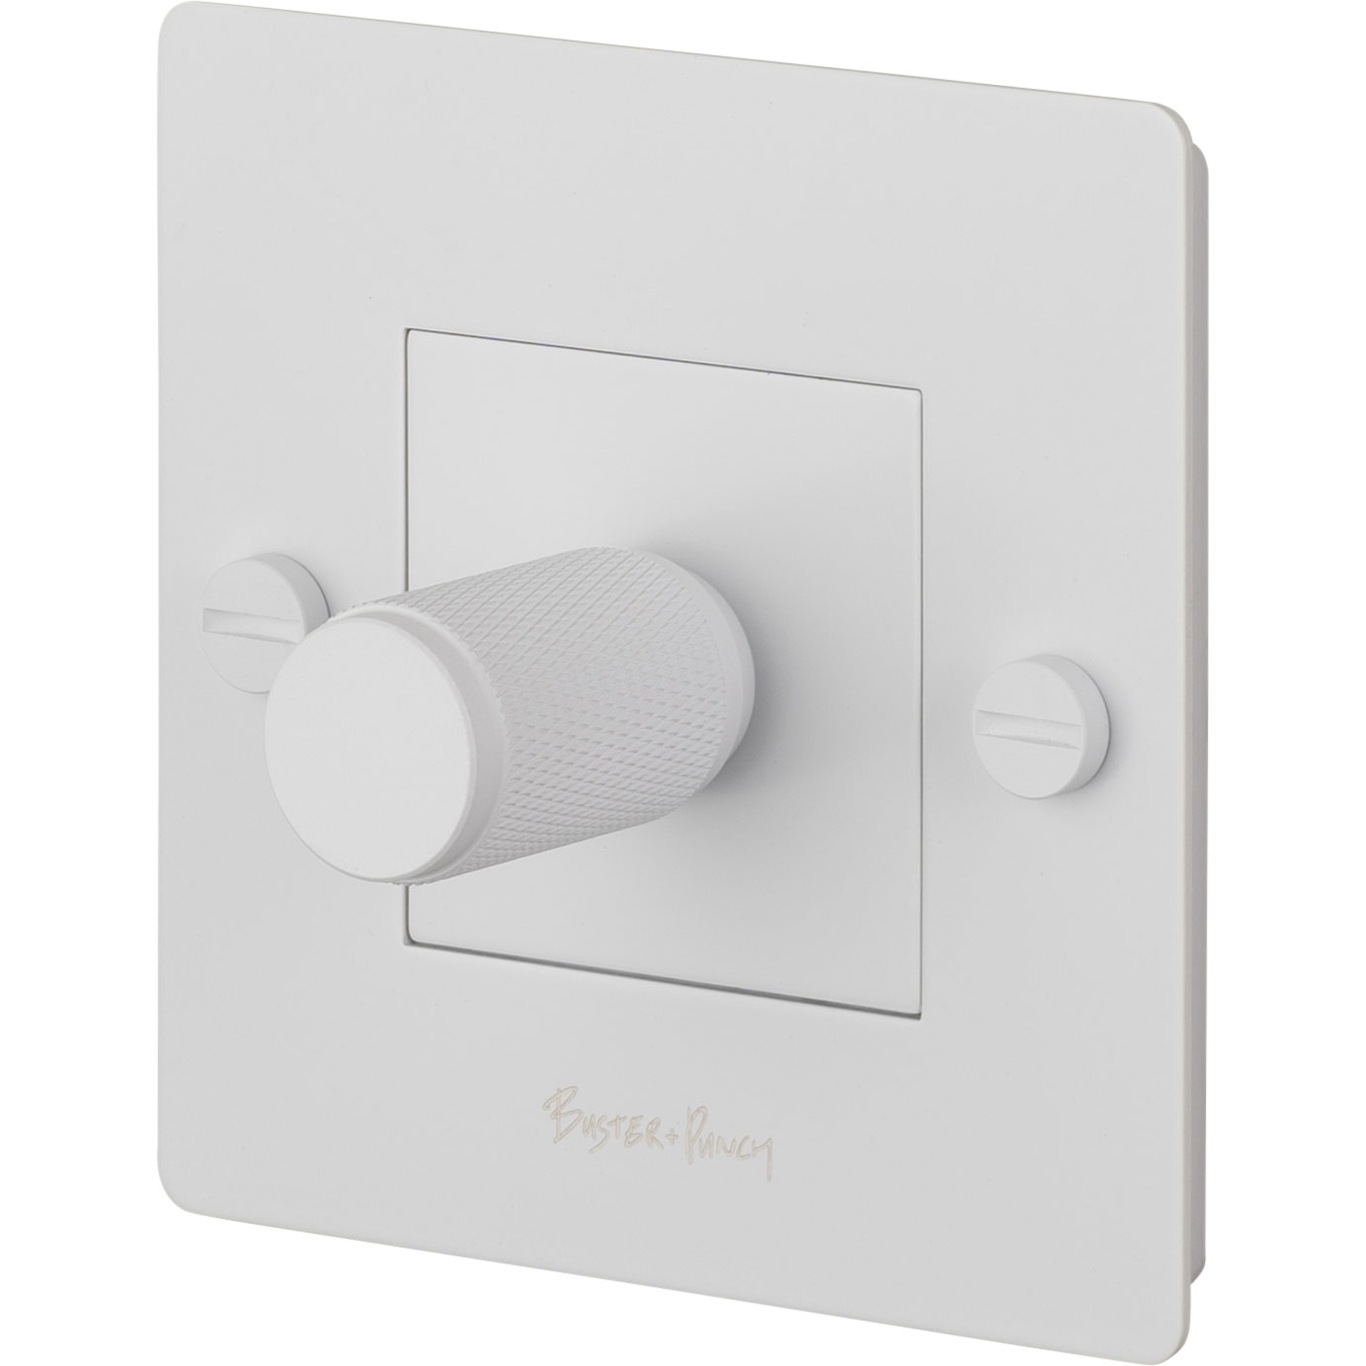 1G Dimmer Switch 2 Way 100W LED, White